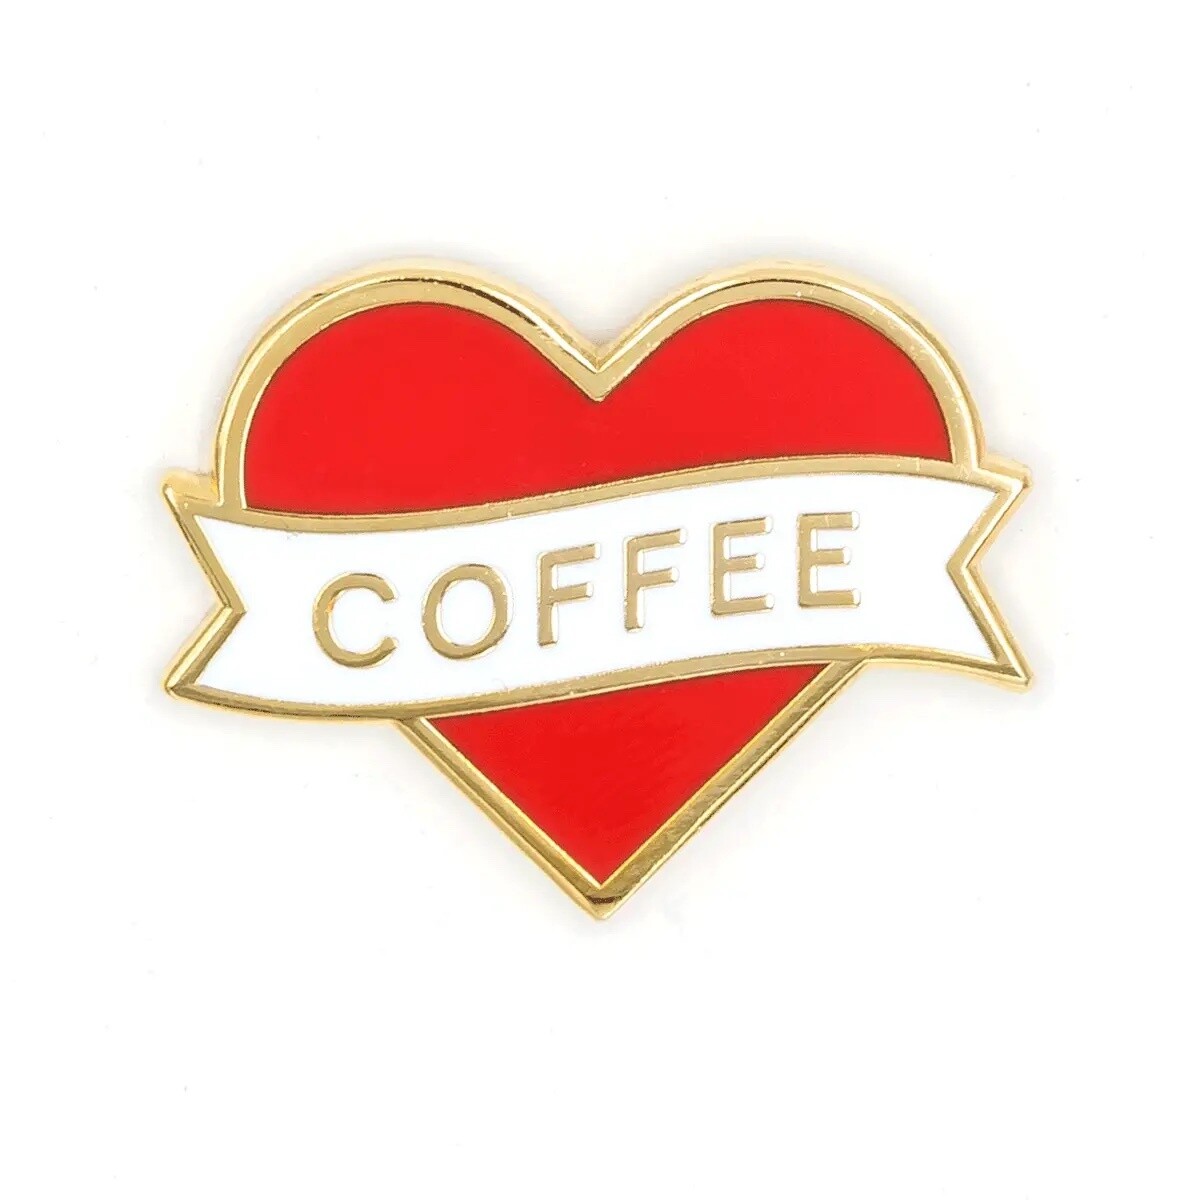 Heart Coffee - Enamel Pin by These Are Things